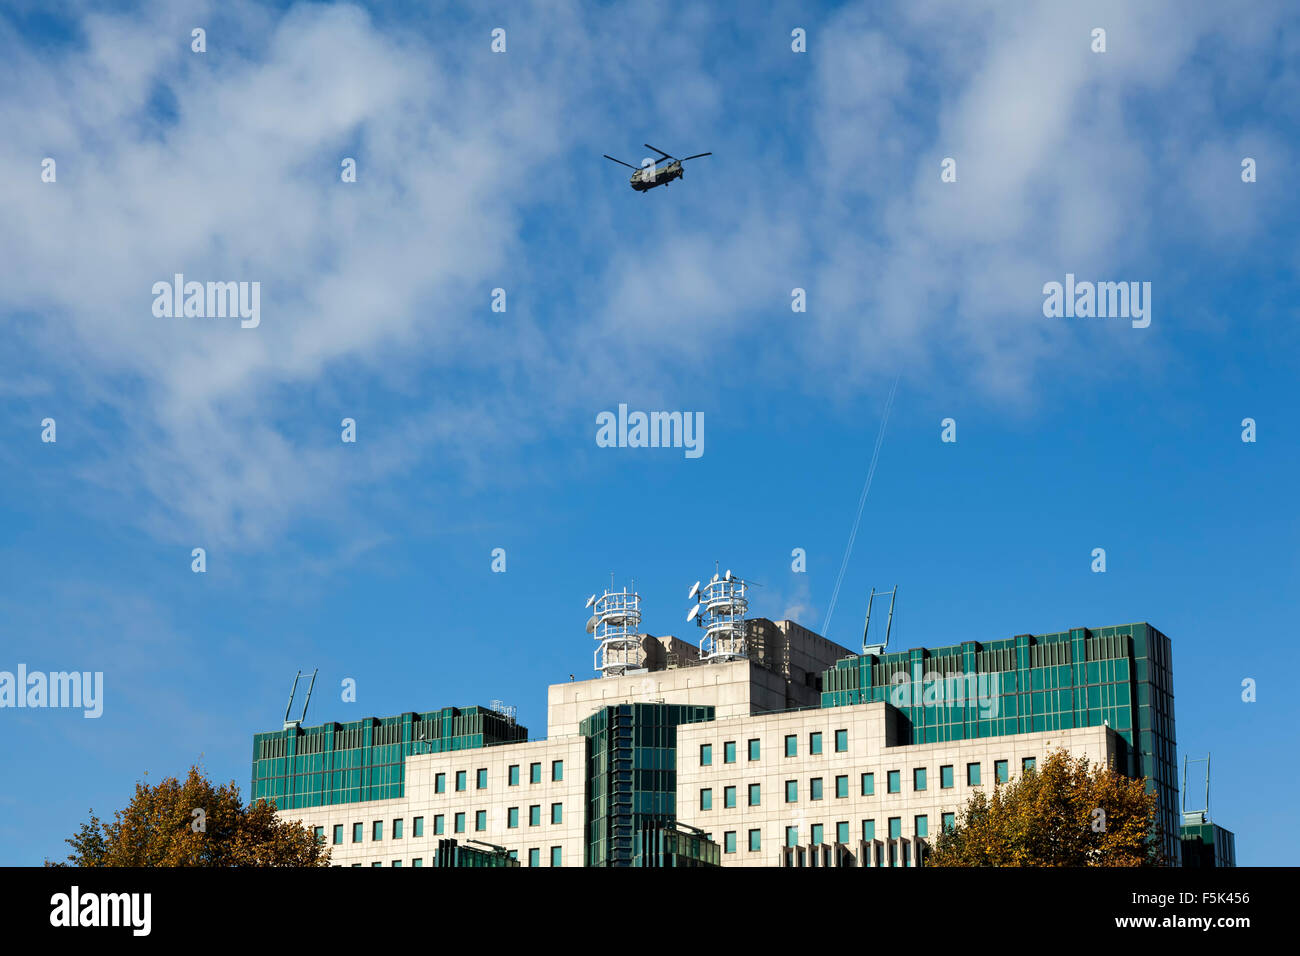 A Chinook Helicopter flies over Mi6 Headquarters in Vauxhall, London Stock Photo